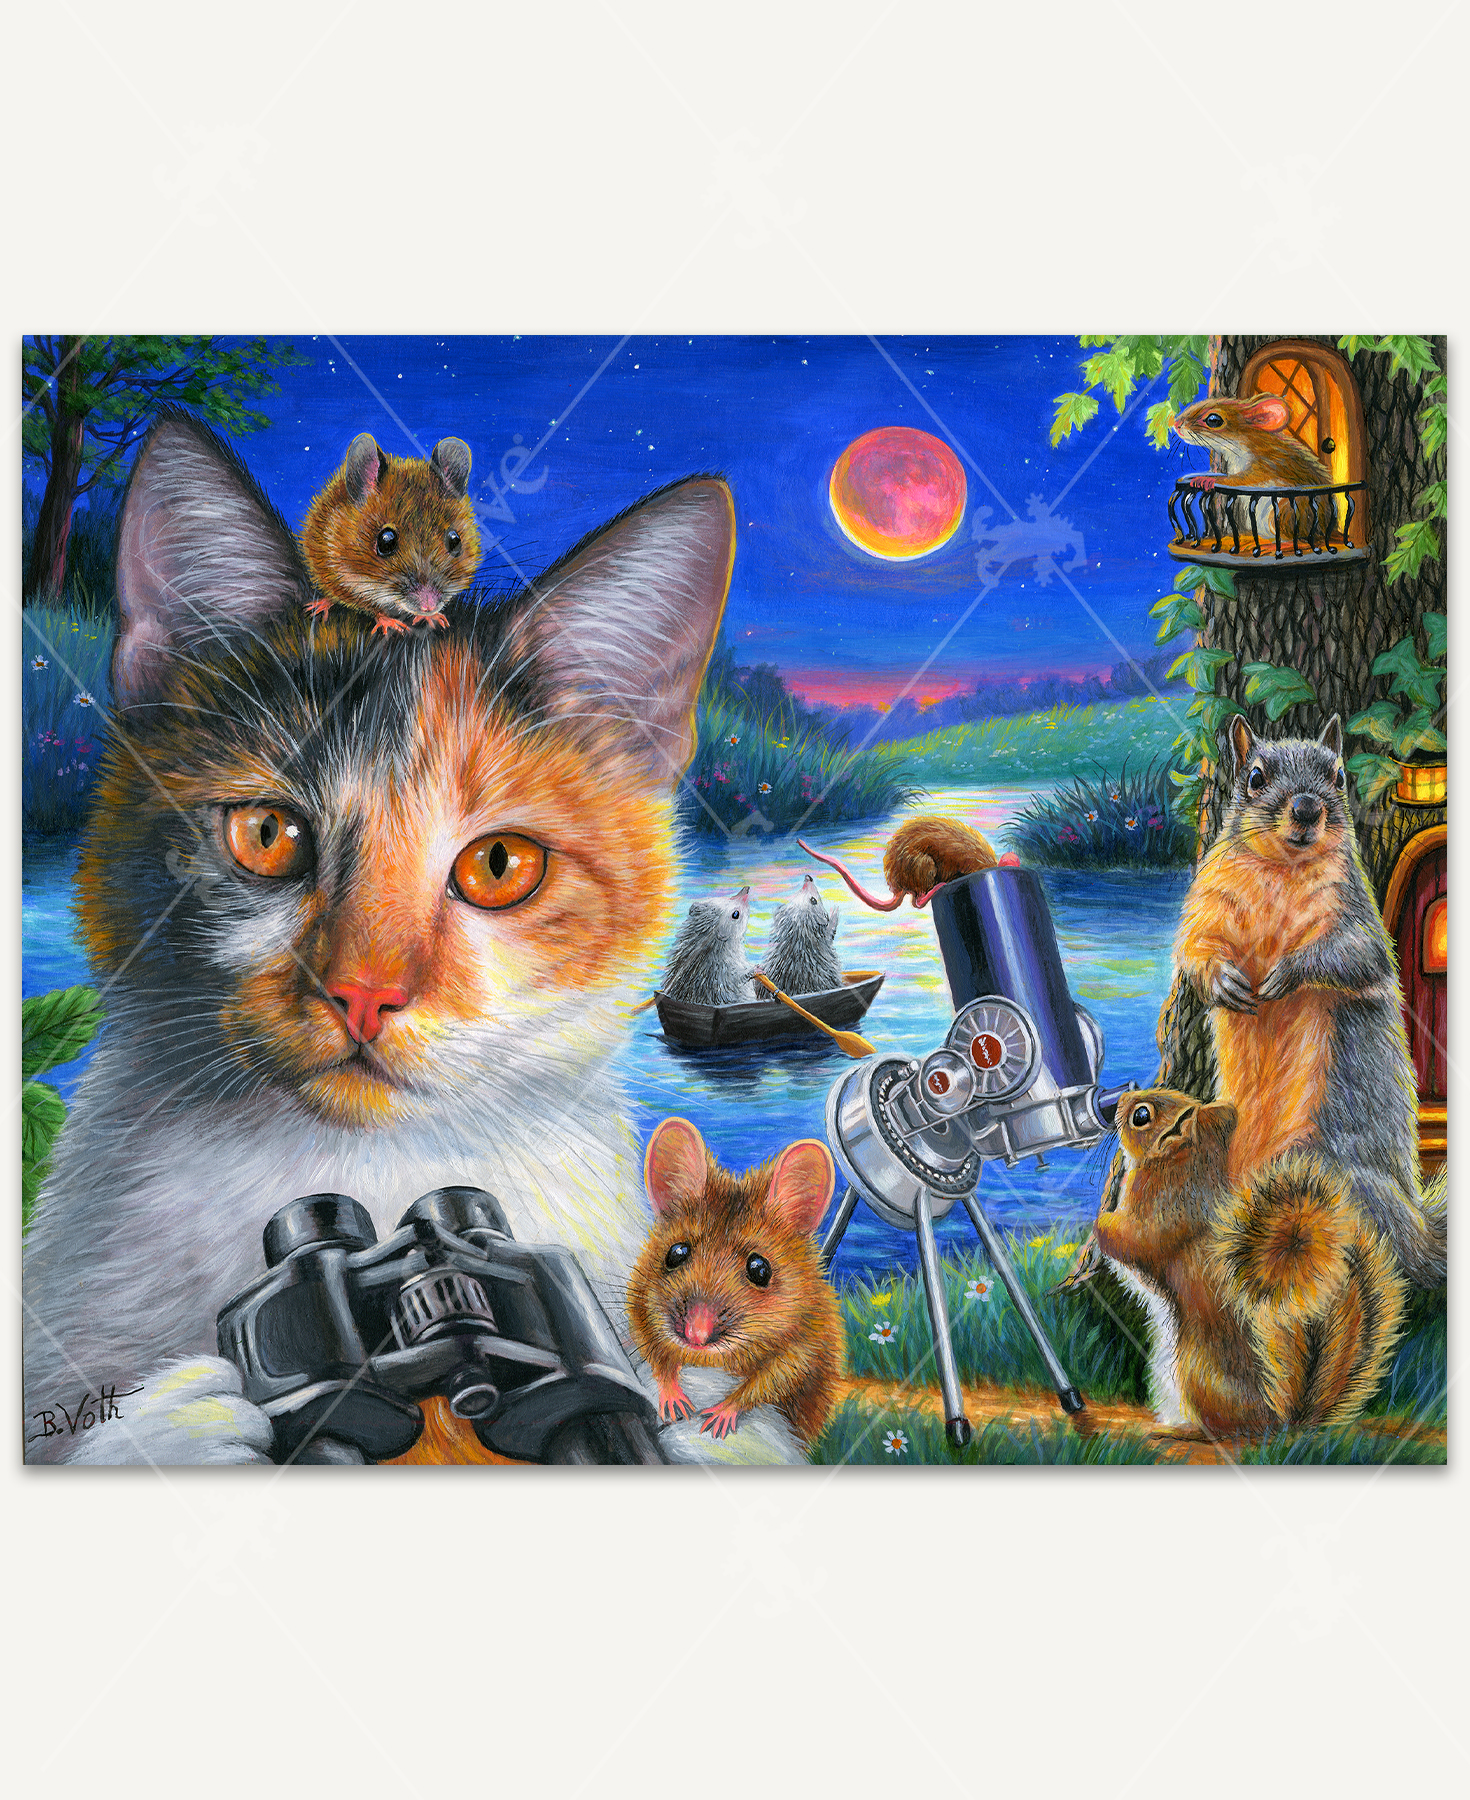 handcrafted wooden jigsaw puzzle of Lena the cat and her small animal friends observing a lunar eclipse near a pond